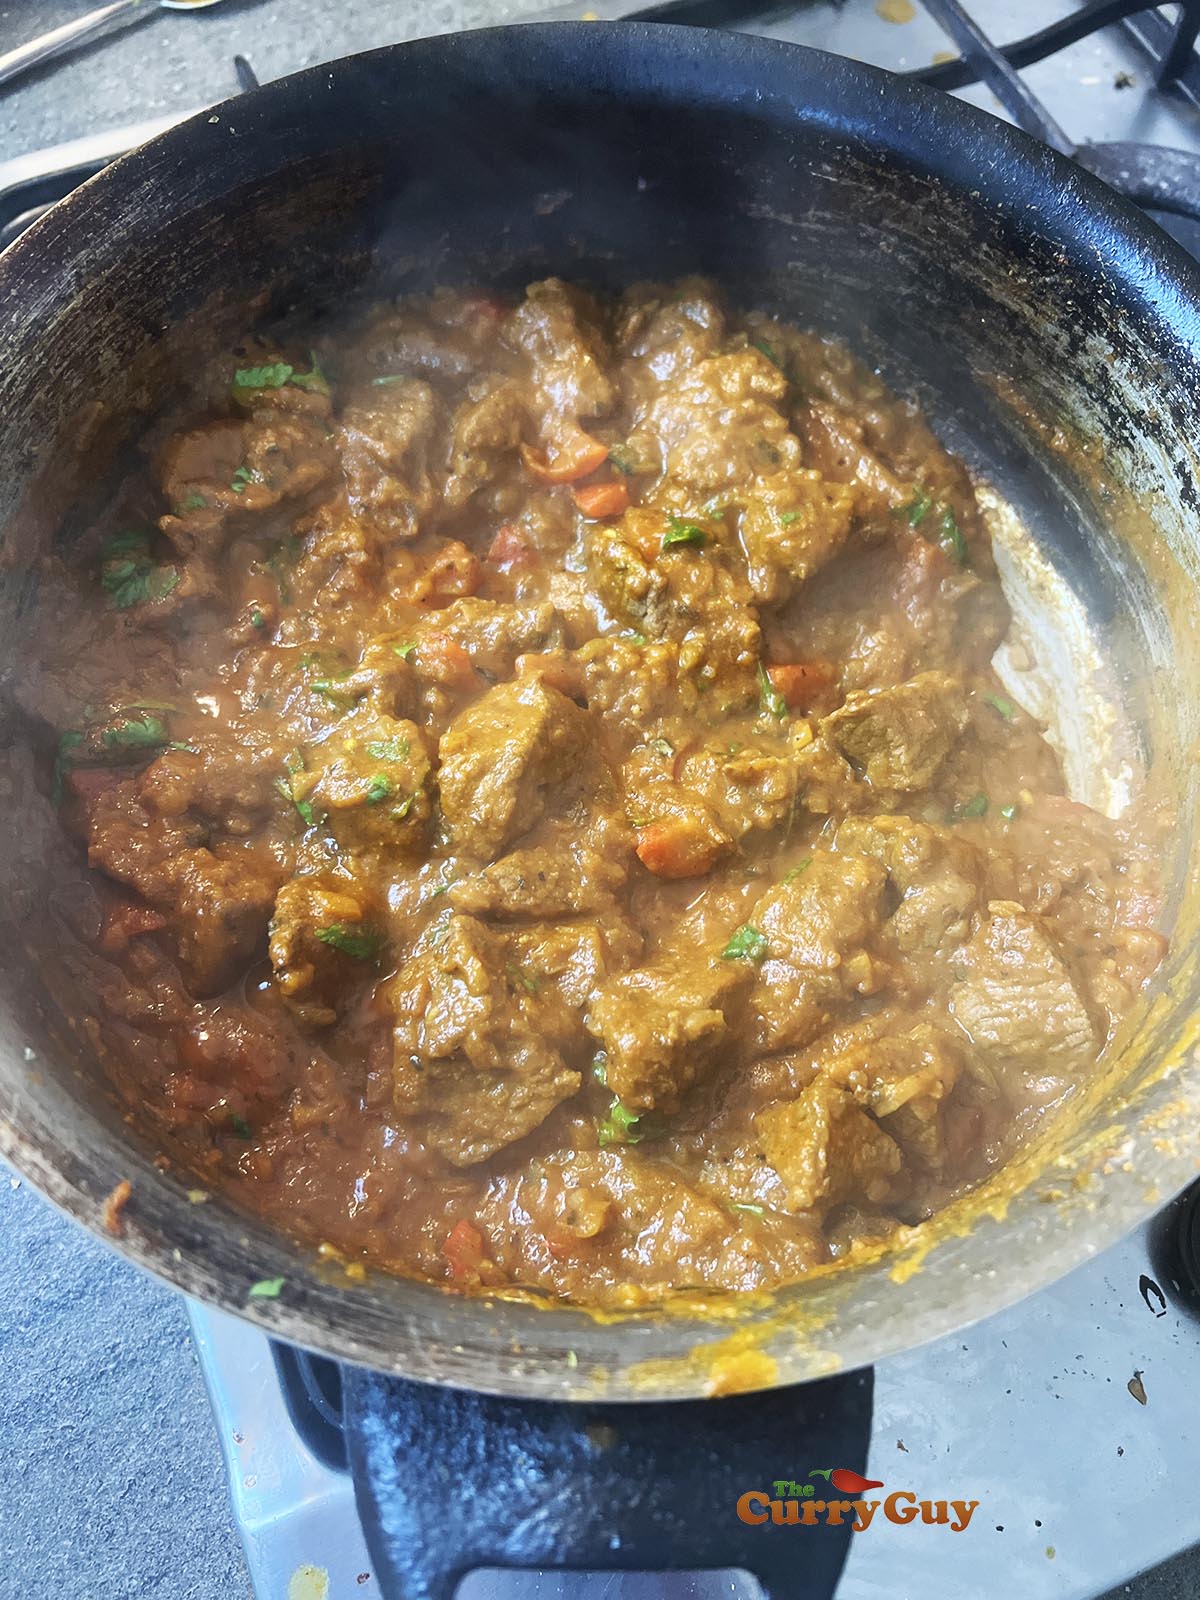 Finished lamb bhuna from scratch